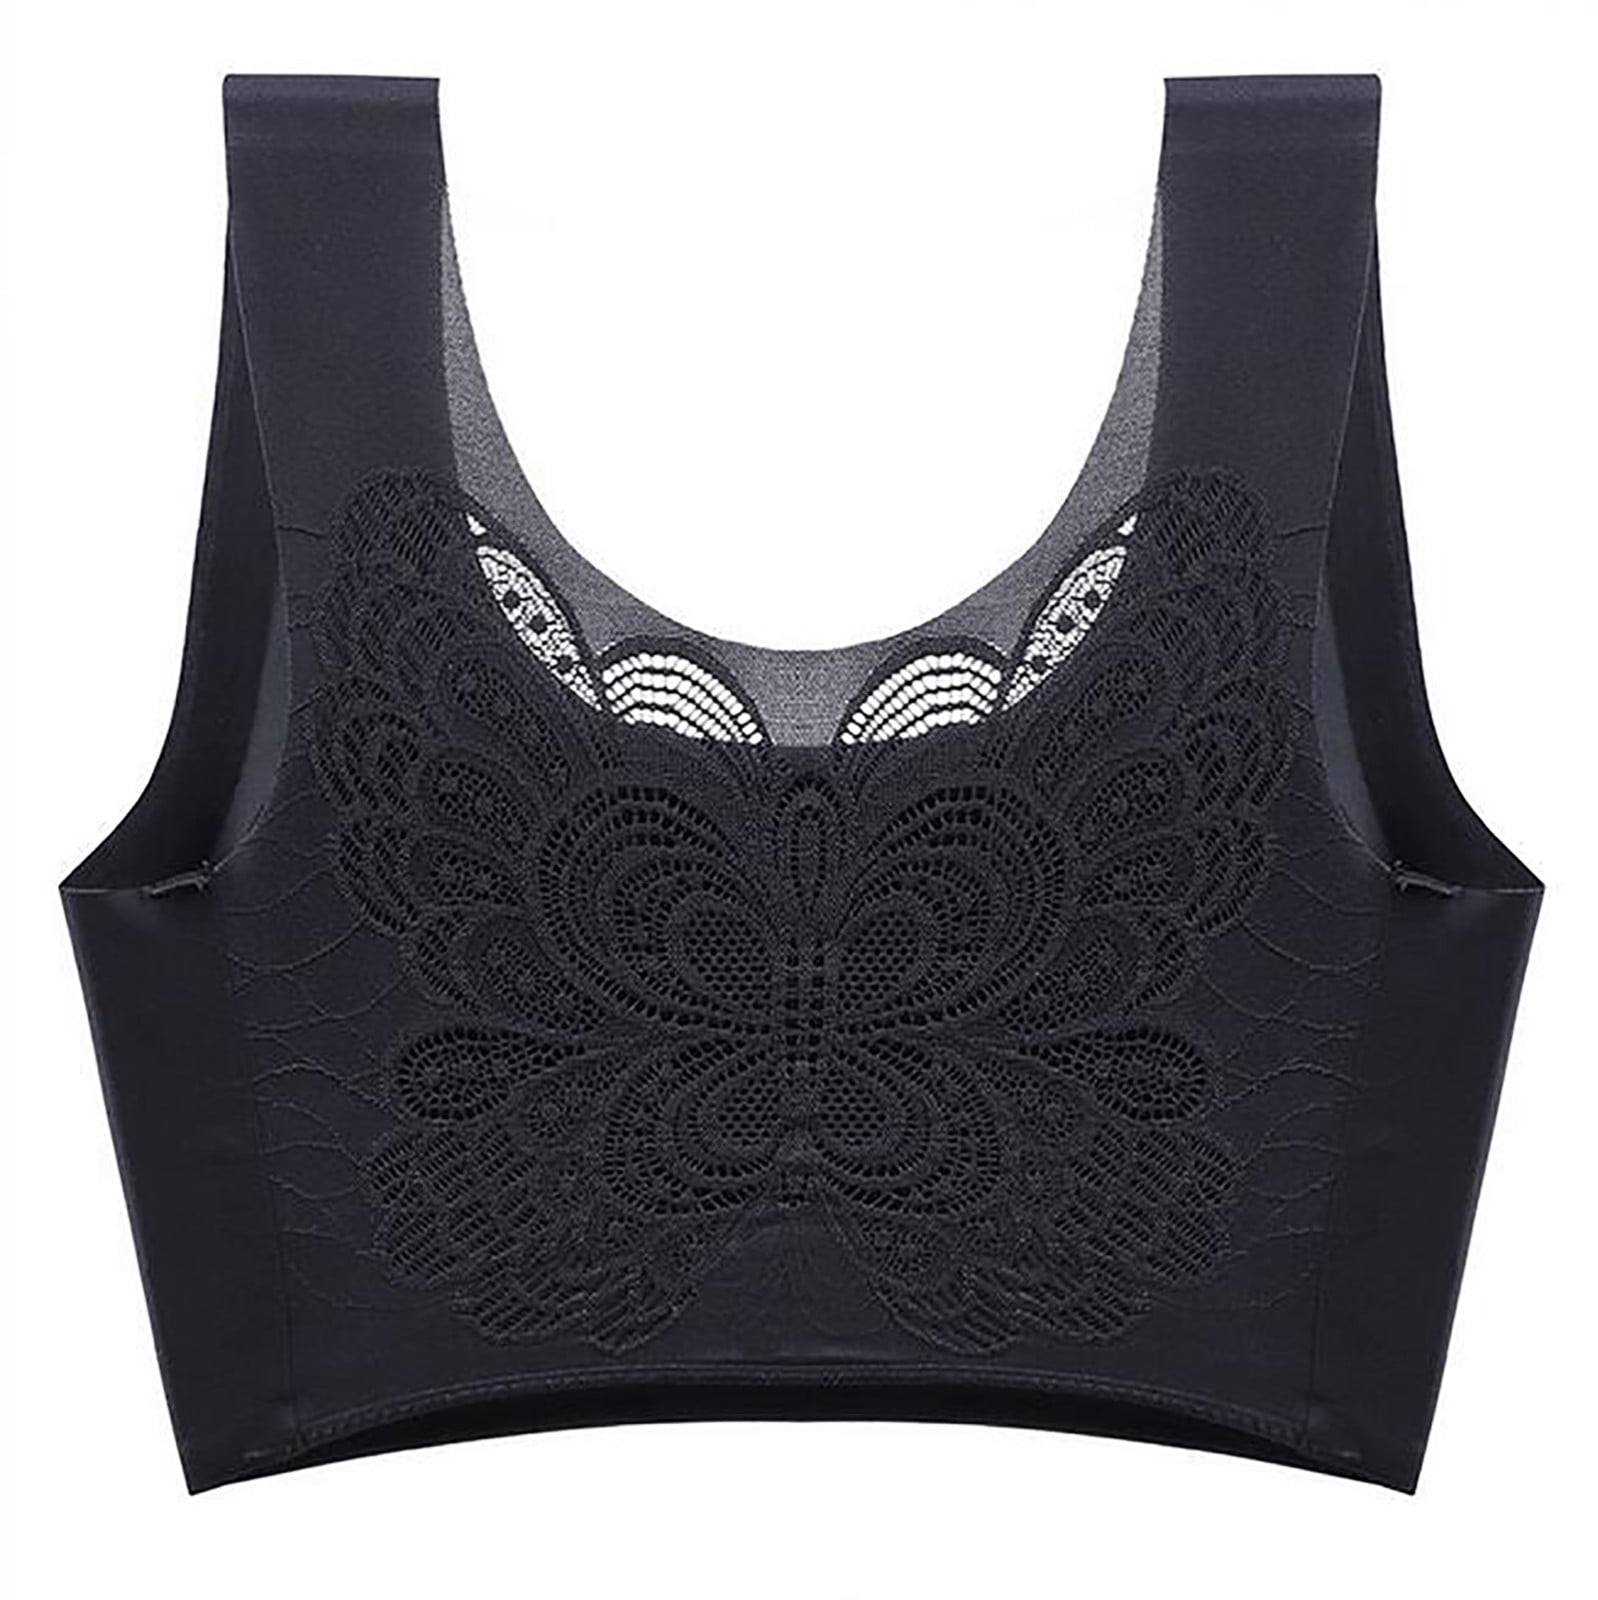 Qcmgmg Womens Bras Clearance Push Up Women's Sports Bras Push Up Seamless Wireless  Bras for Large Breasted Women Butterfly Back T-Shirt Bra Black M 